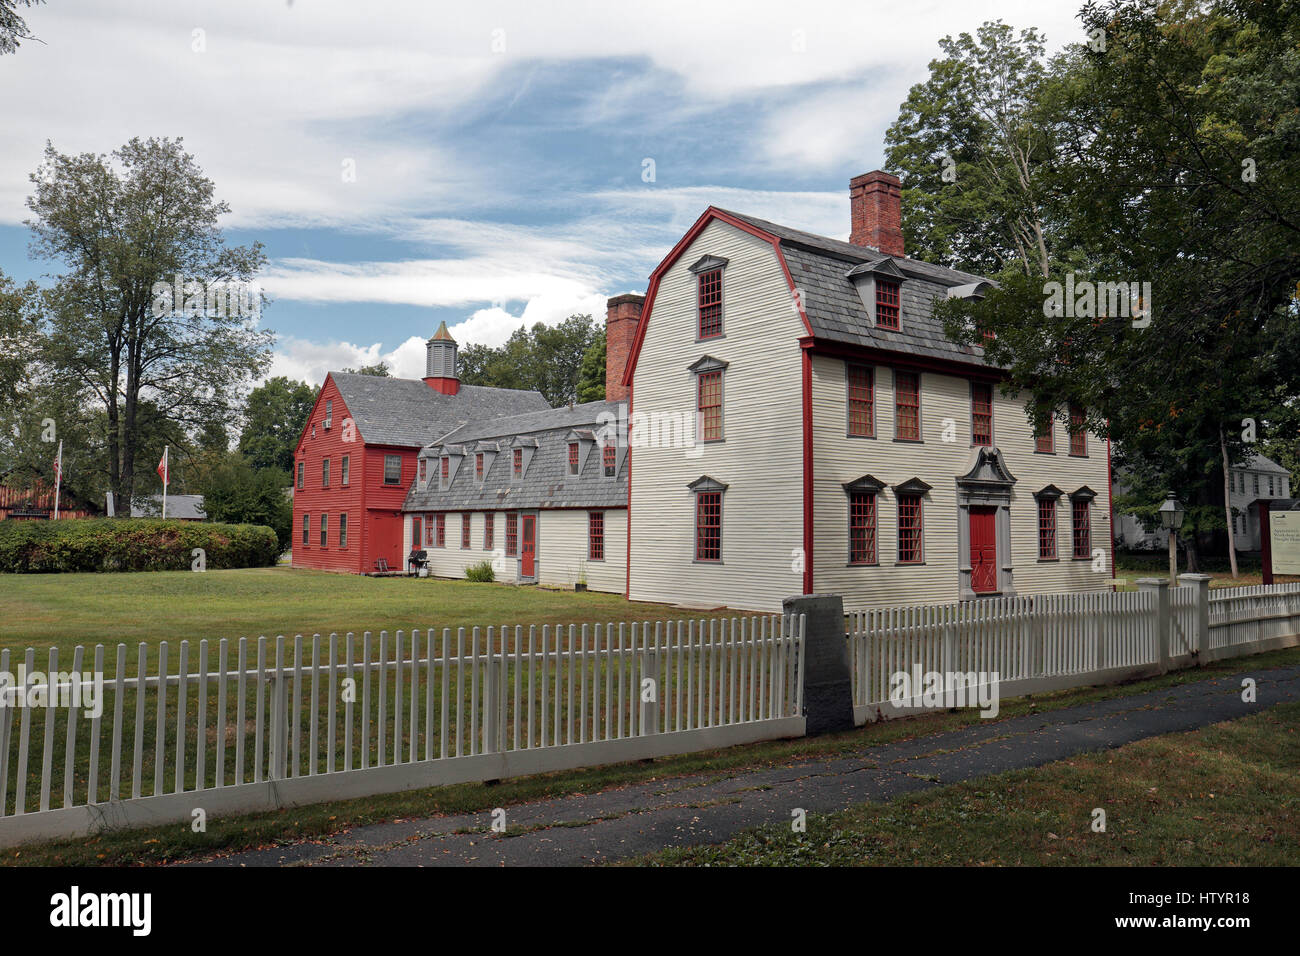 The Dwight House a house from 1754 in Historic Deerfield, Franklin County, Massachusetts, United States. Stock Photo